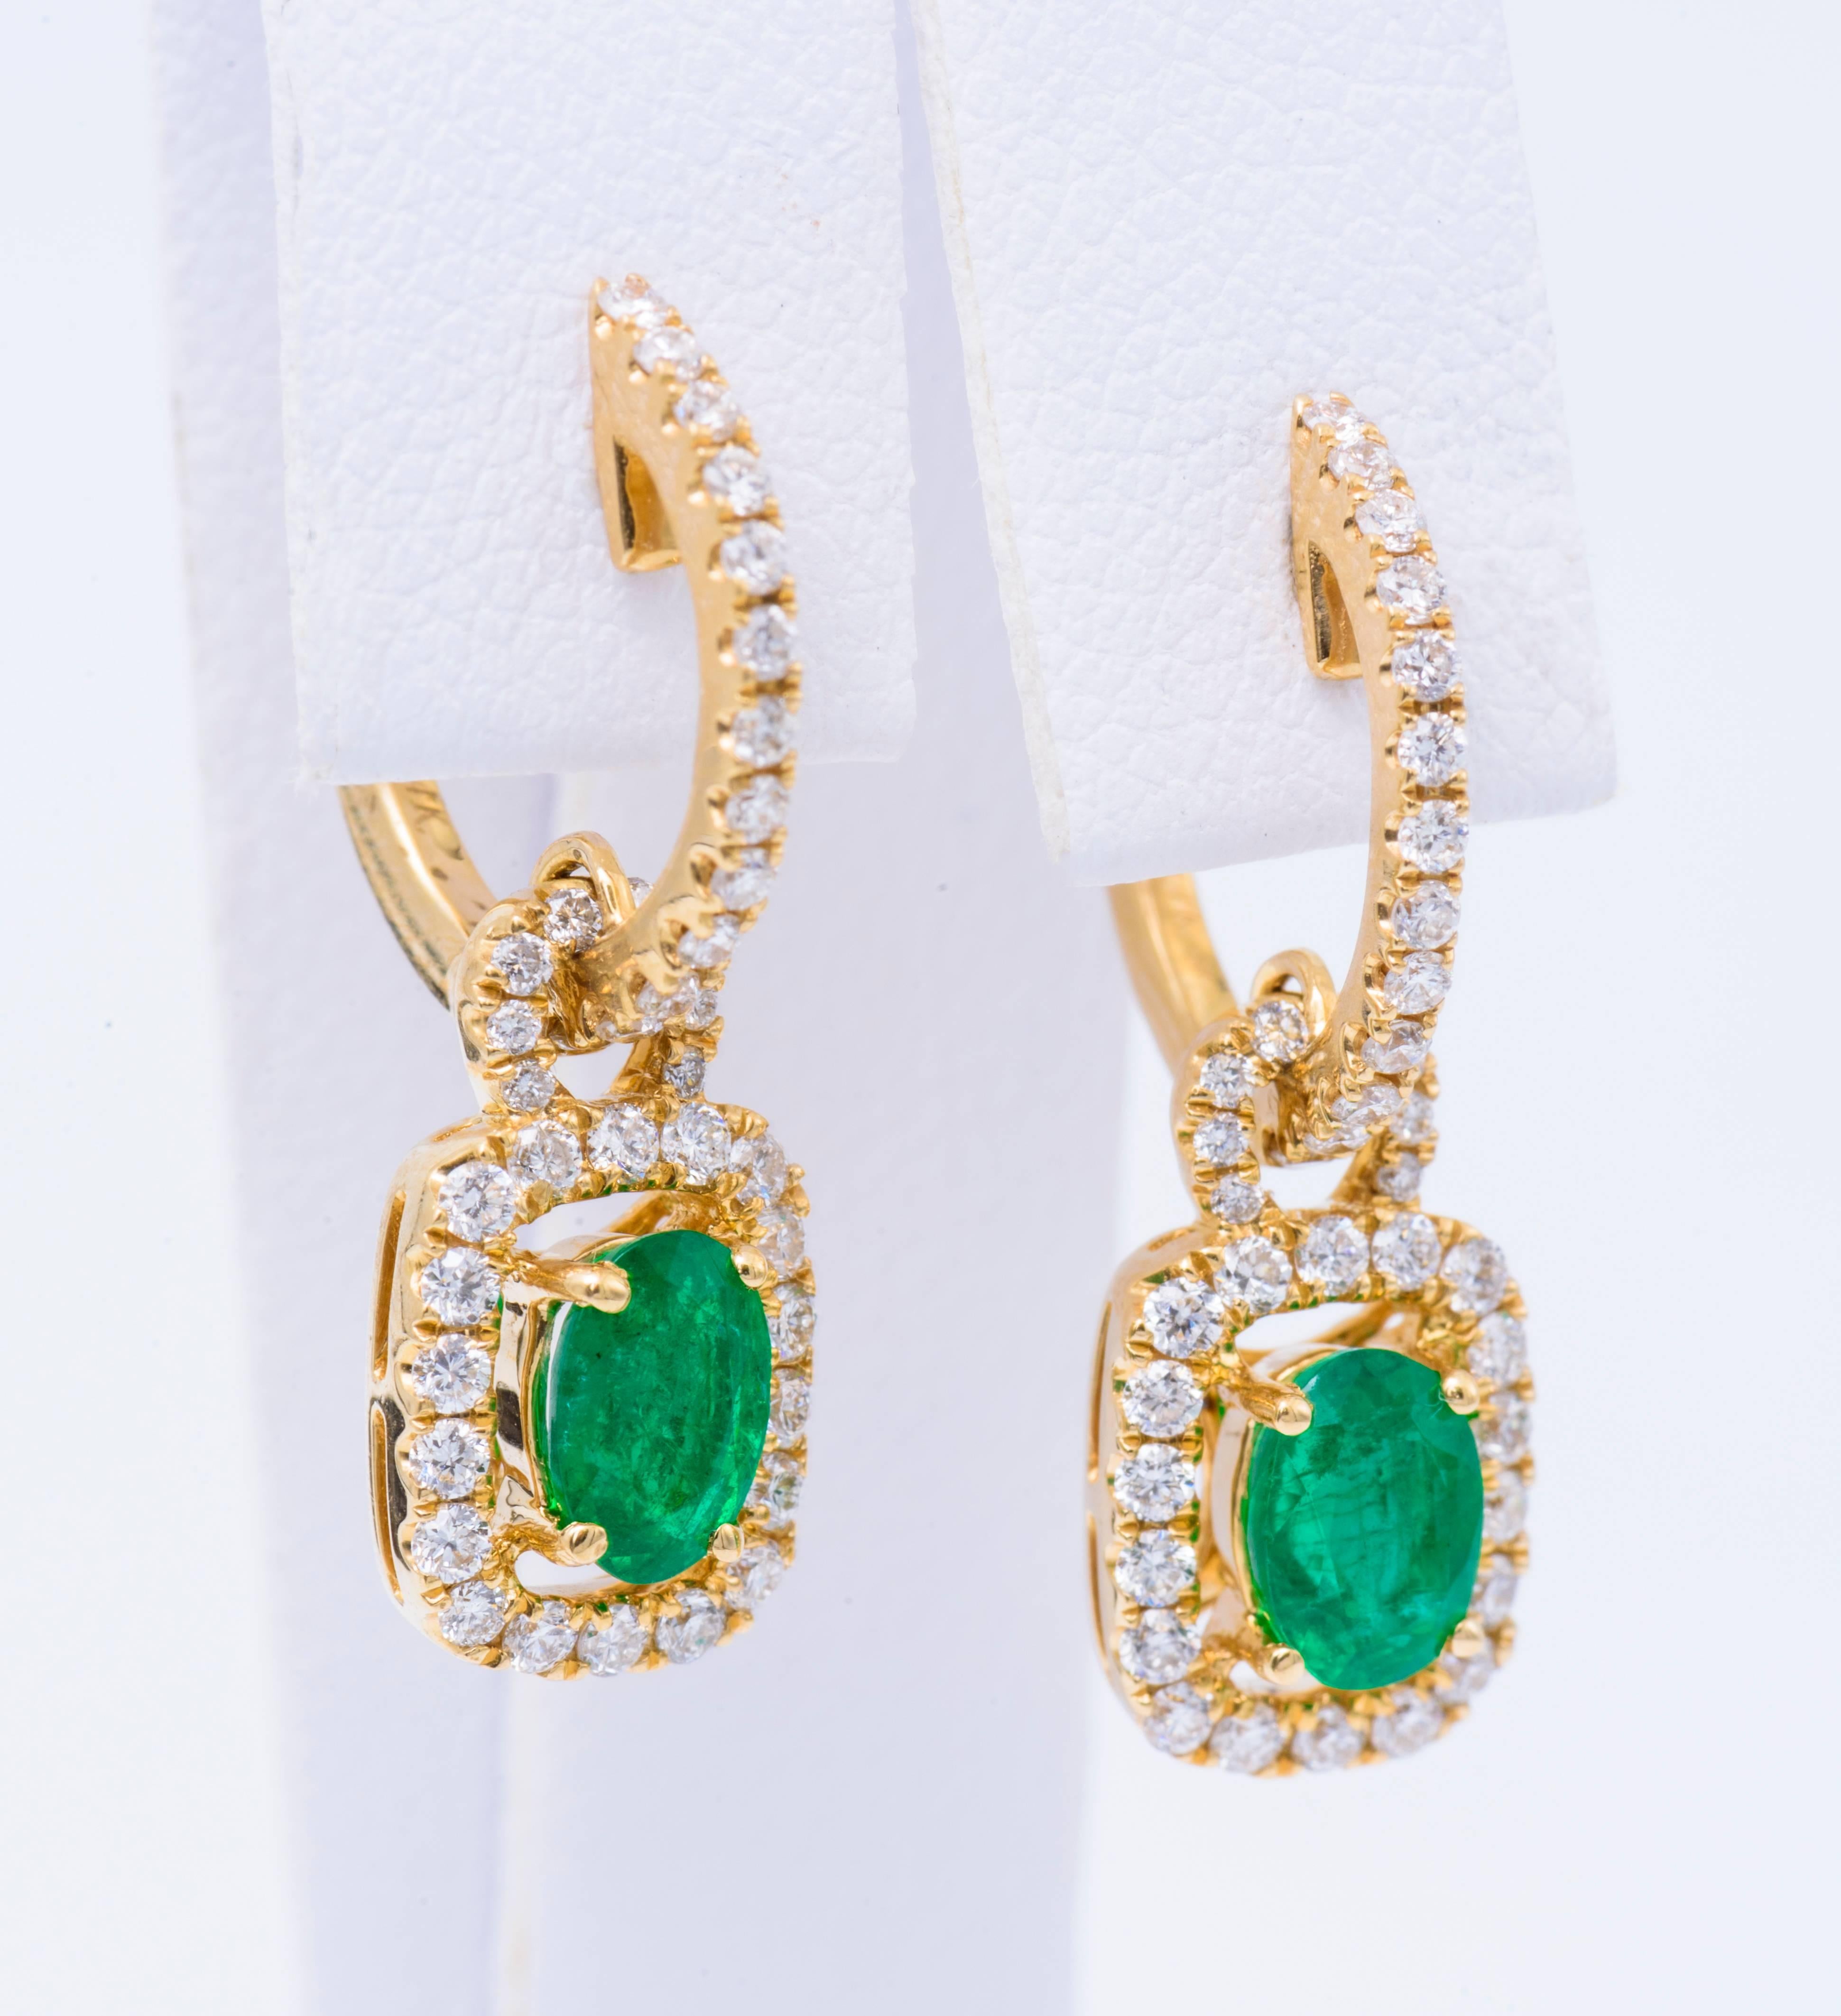 14K yellow gold
Each emerald measures 6x 4 mm Total Weight : 0.84 cts
Diamonds : 0.71 cts.
The earrings measures 2.4 cm x 9 mm
All our gemstone are genuine and sourced with the highest degree of integrity